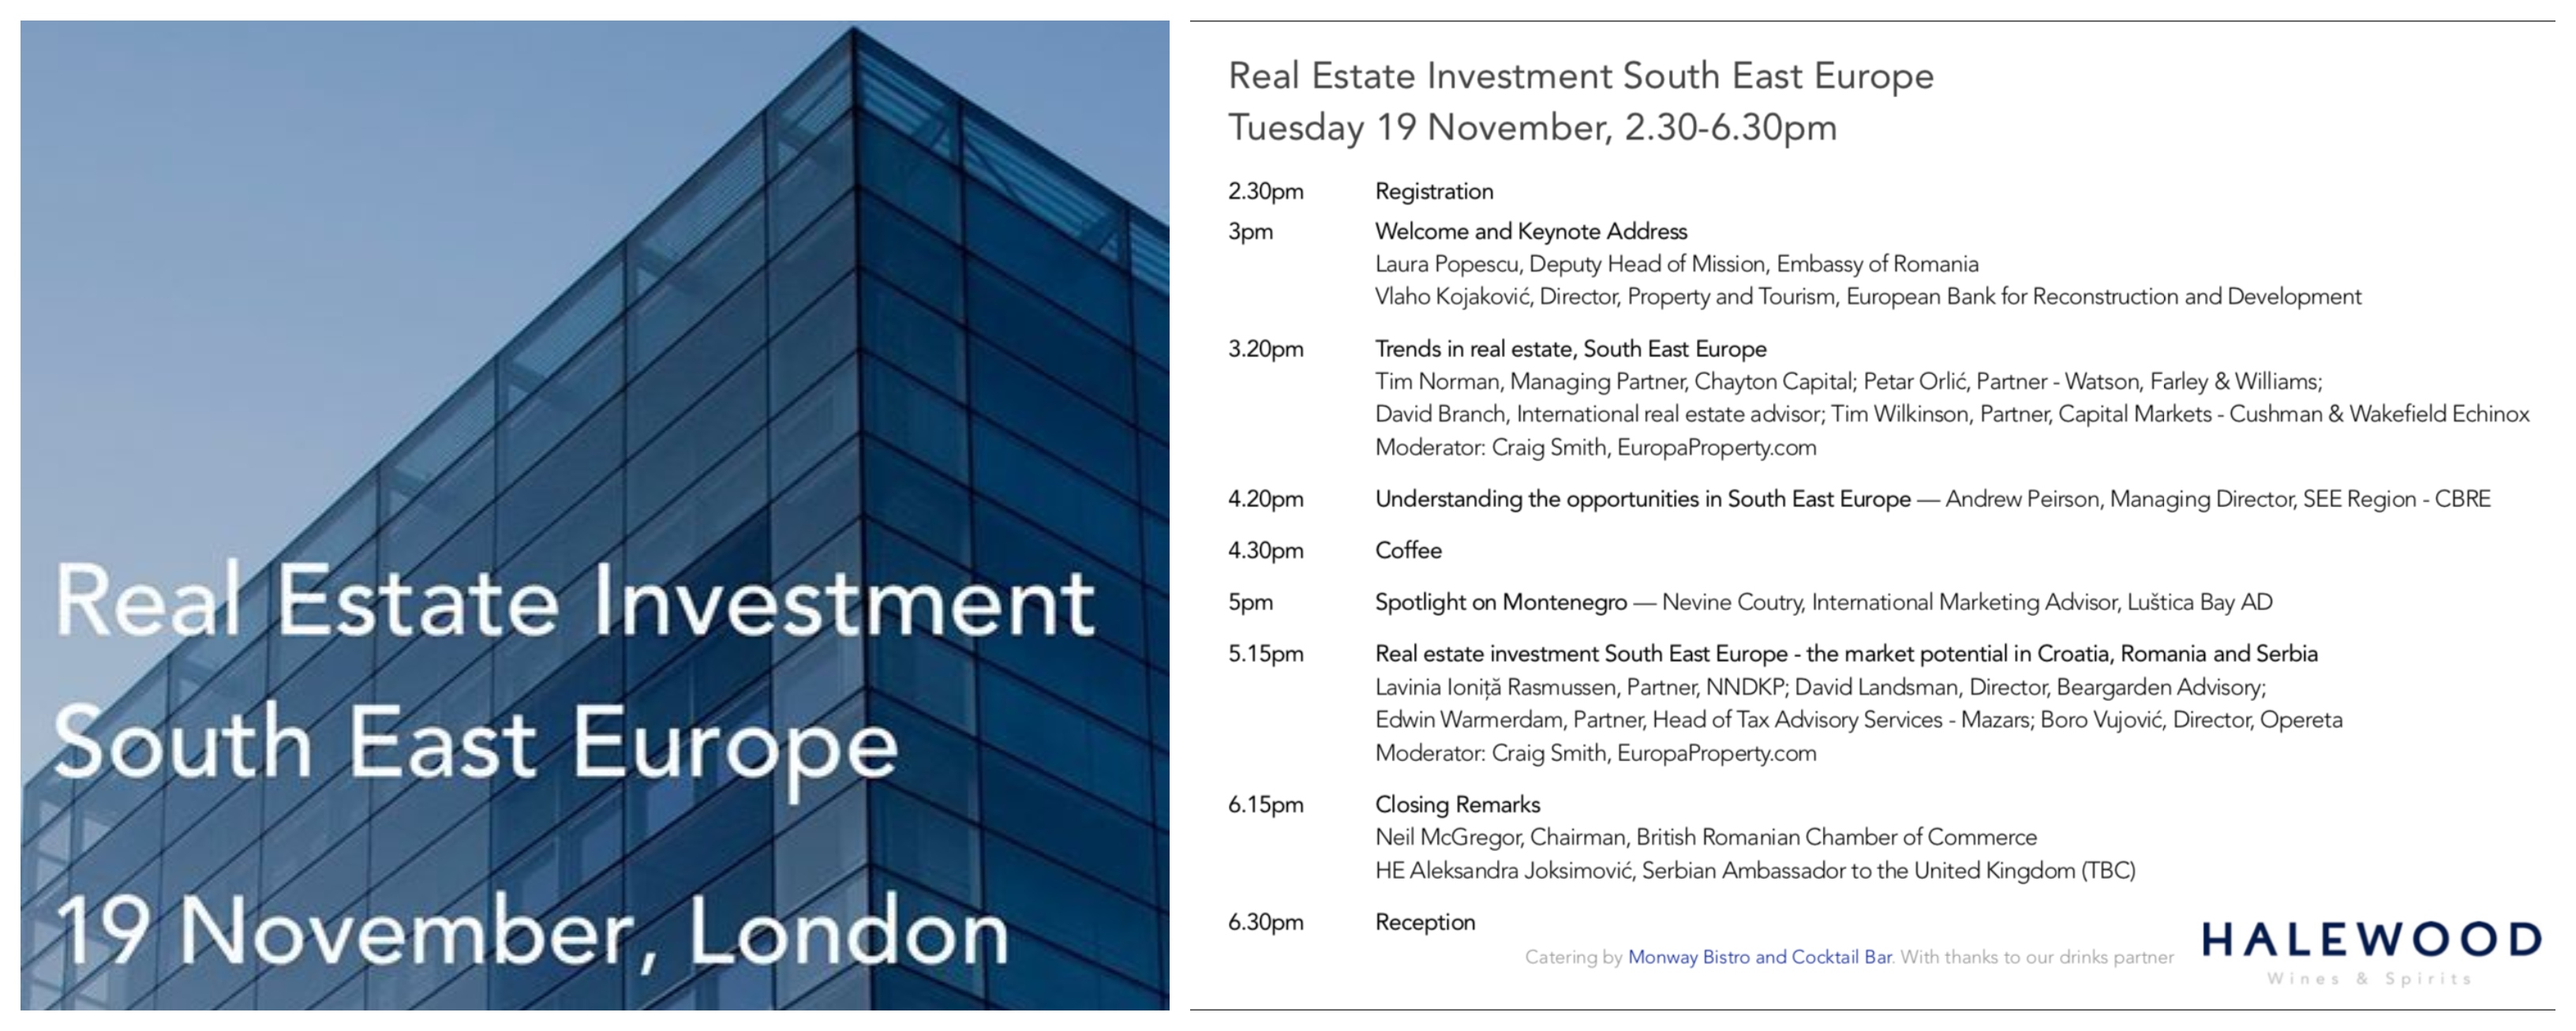 Welcome to Real Estate Investment South East Europe on November 19